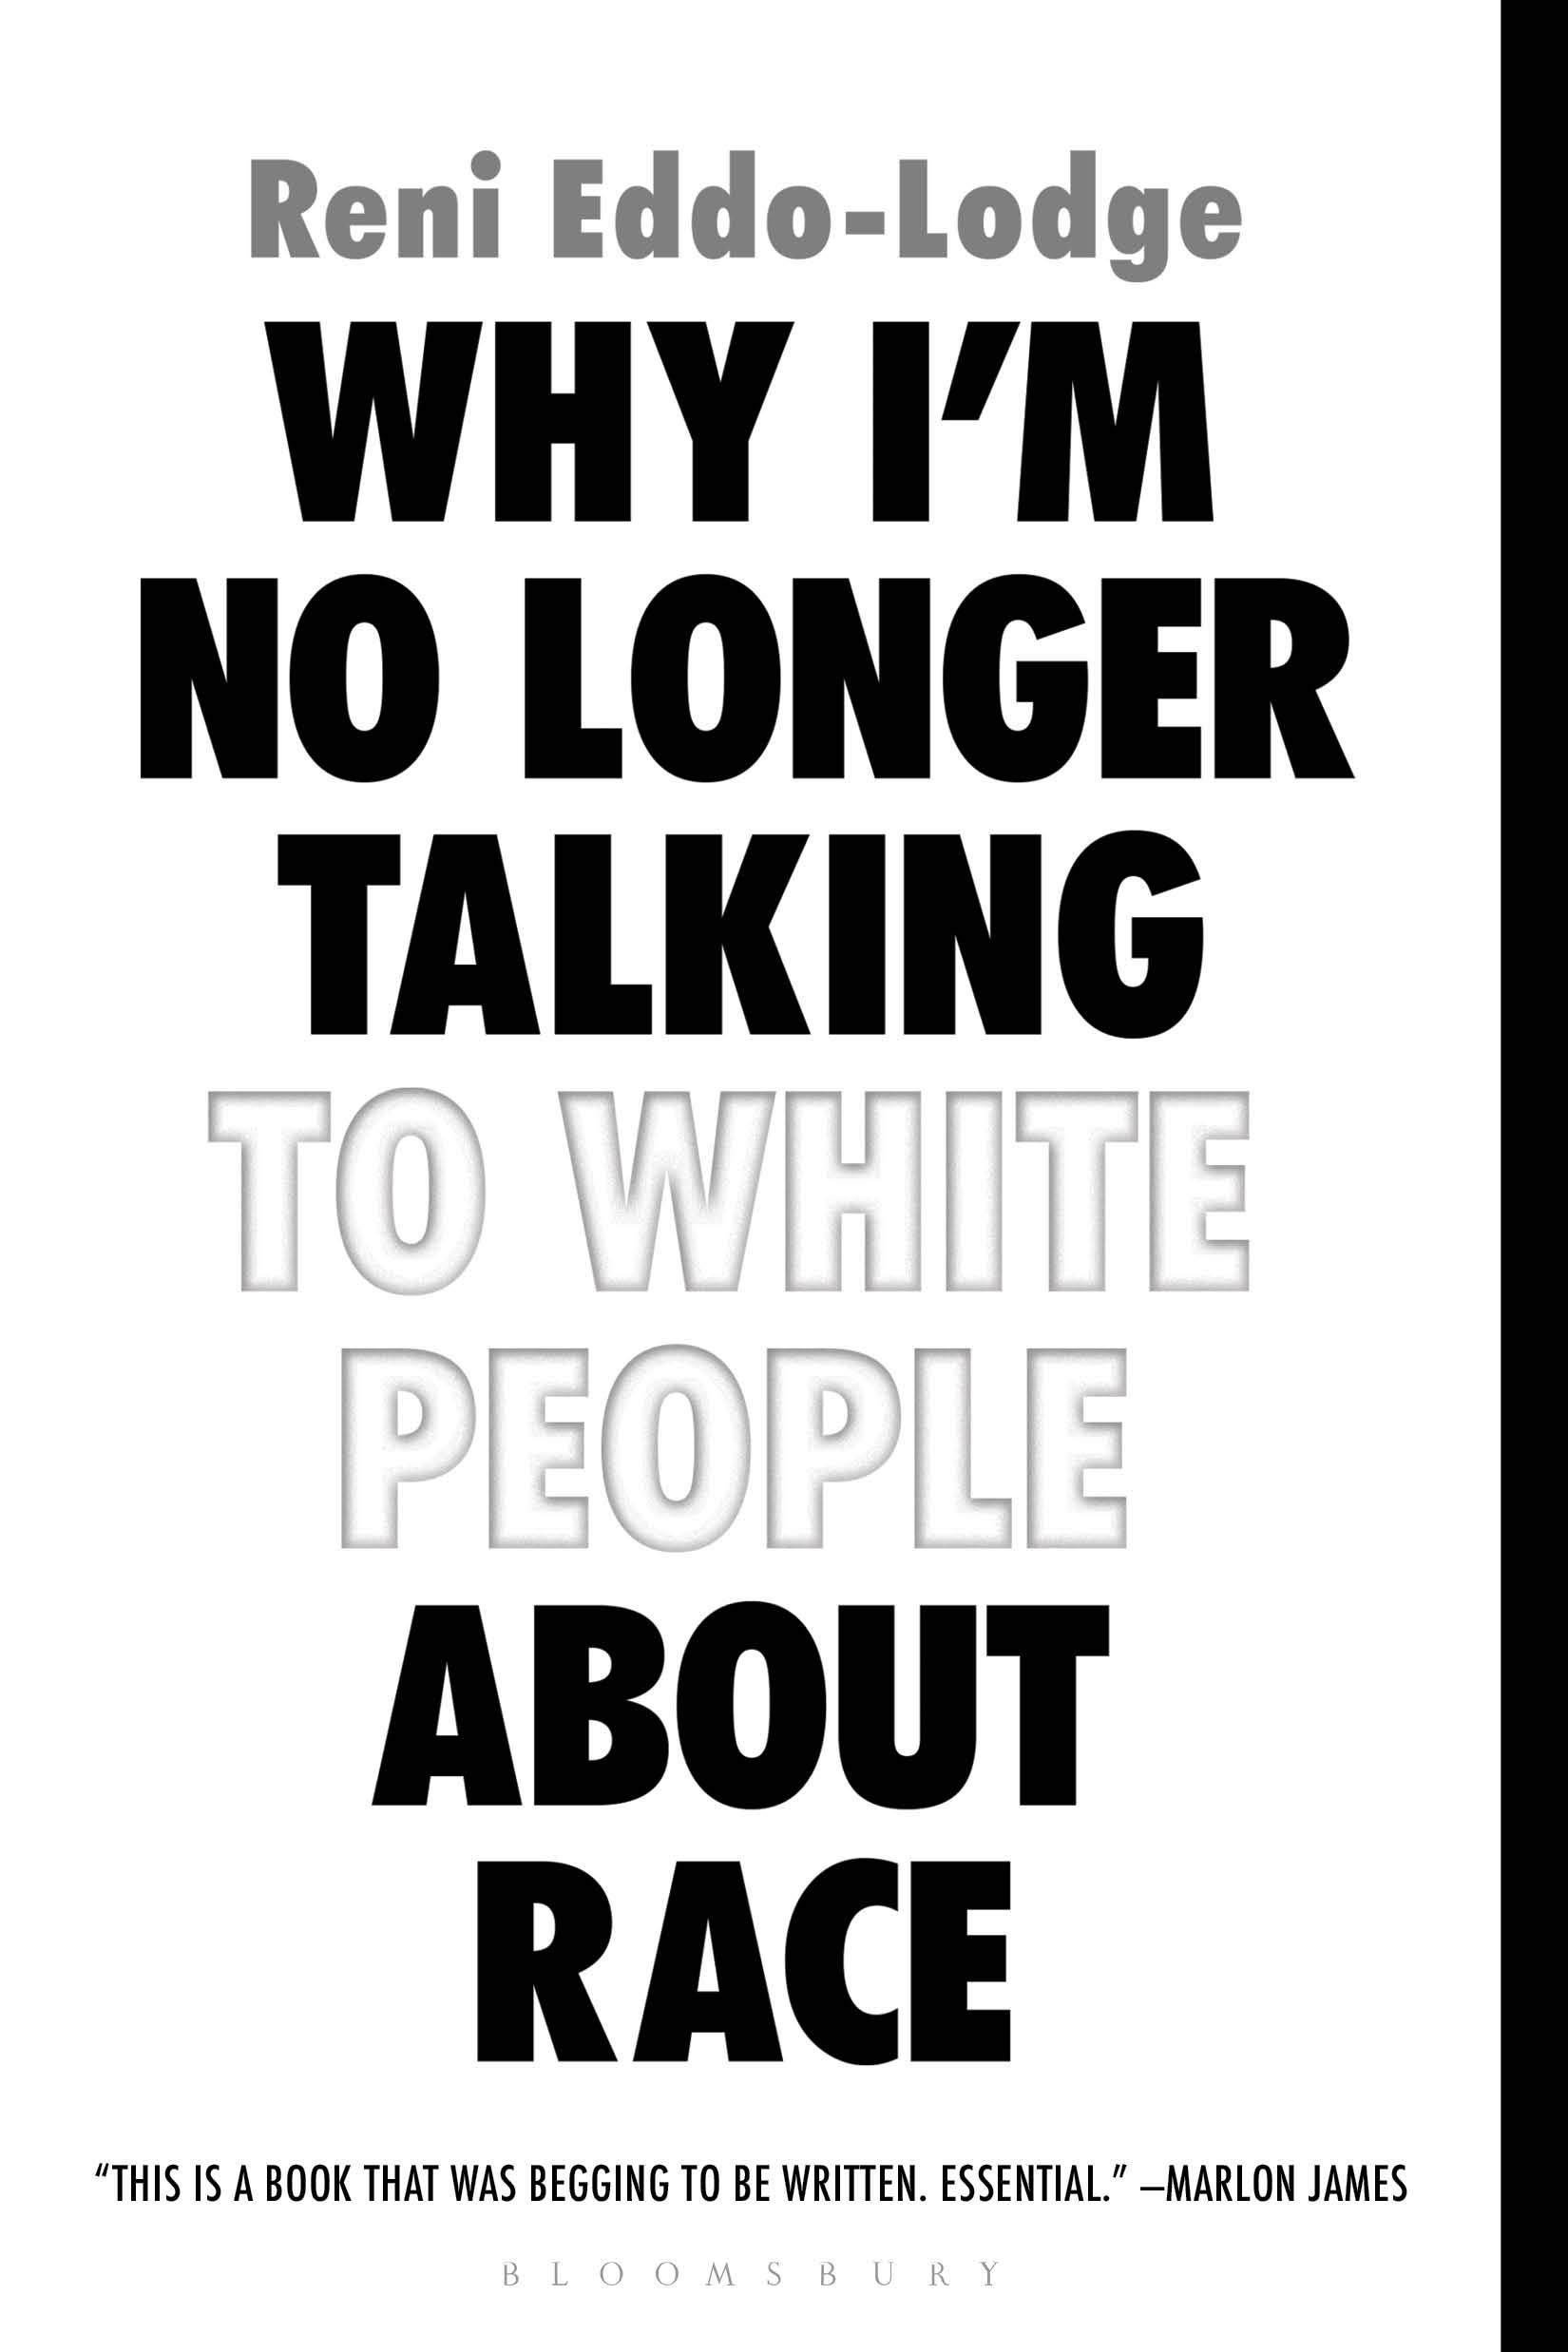 White book cover with black text except for "white people" which is in white font to fade into the background